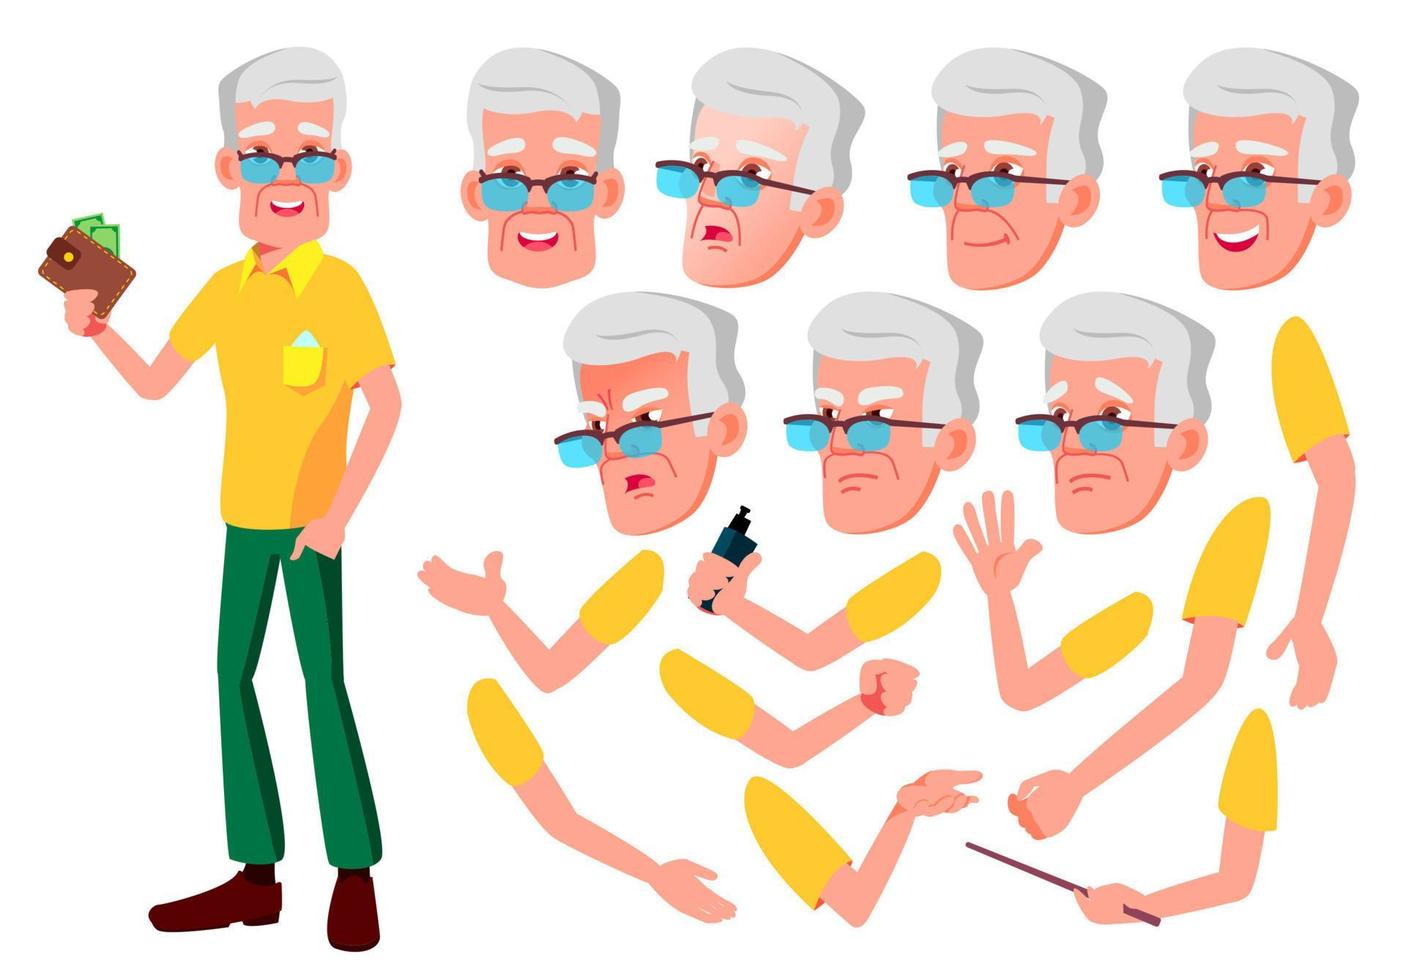 Old Man Vector. Senior Person. Aged, Elderly People. Face Emotions, Various Gestures. Animation Creation Set. Isolated Flat Cartoon Character Illustration vector